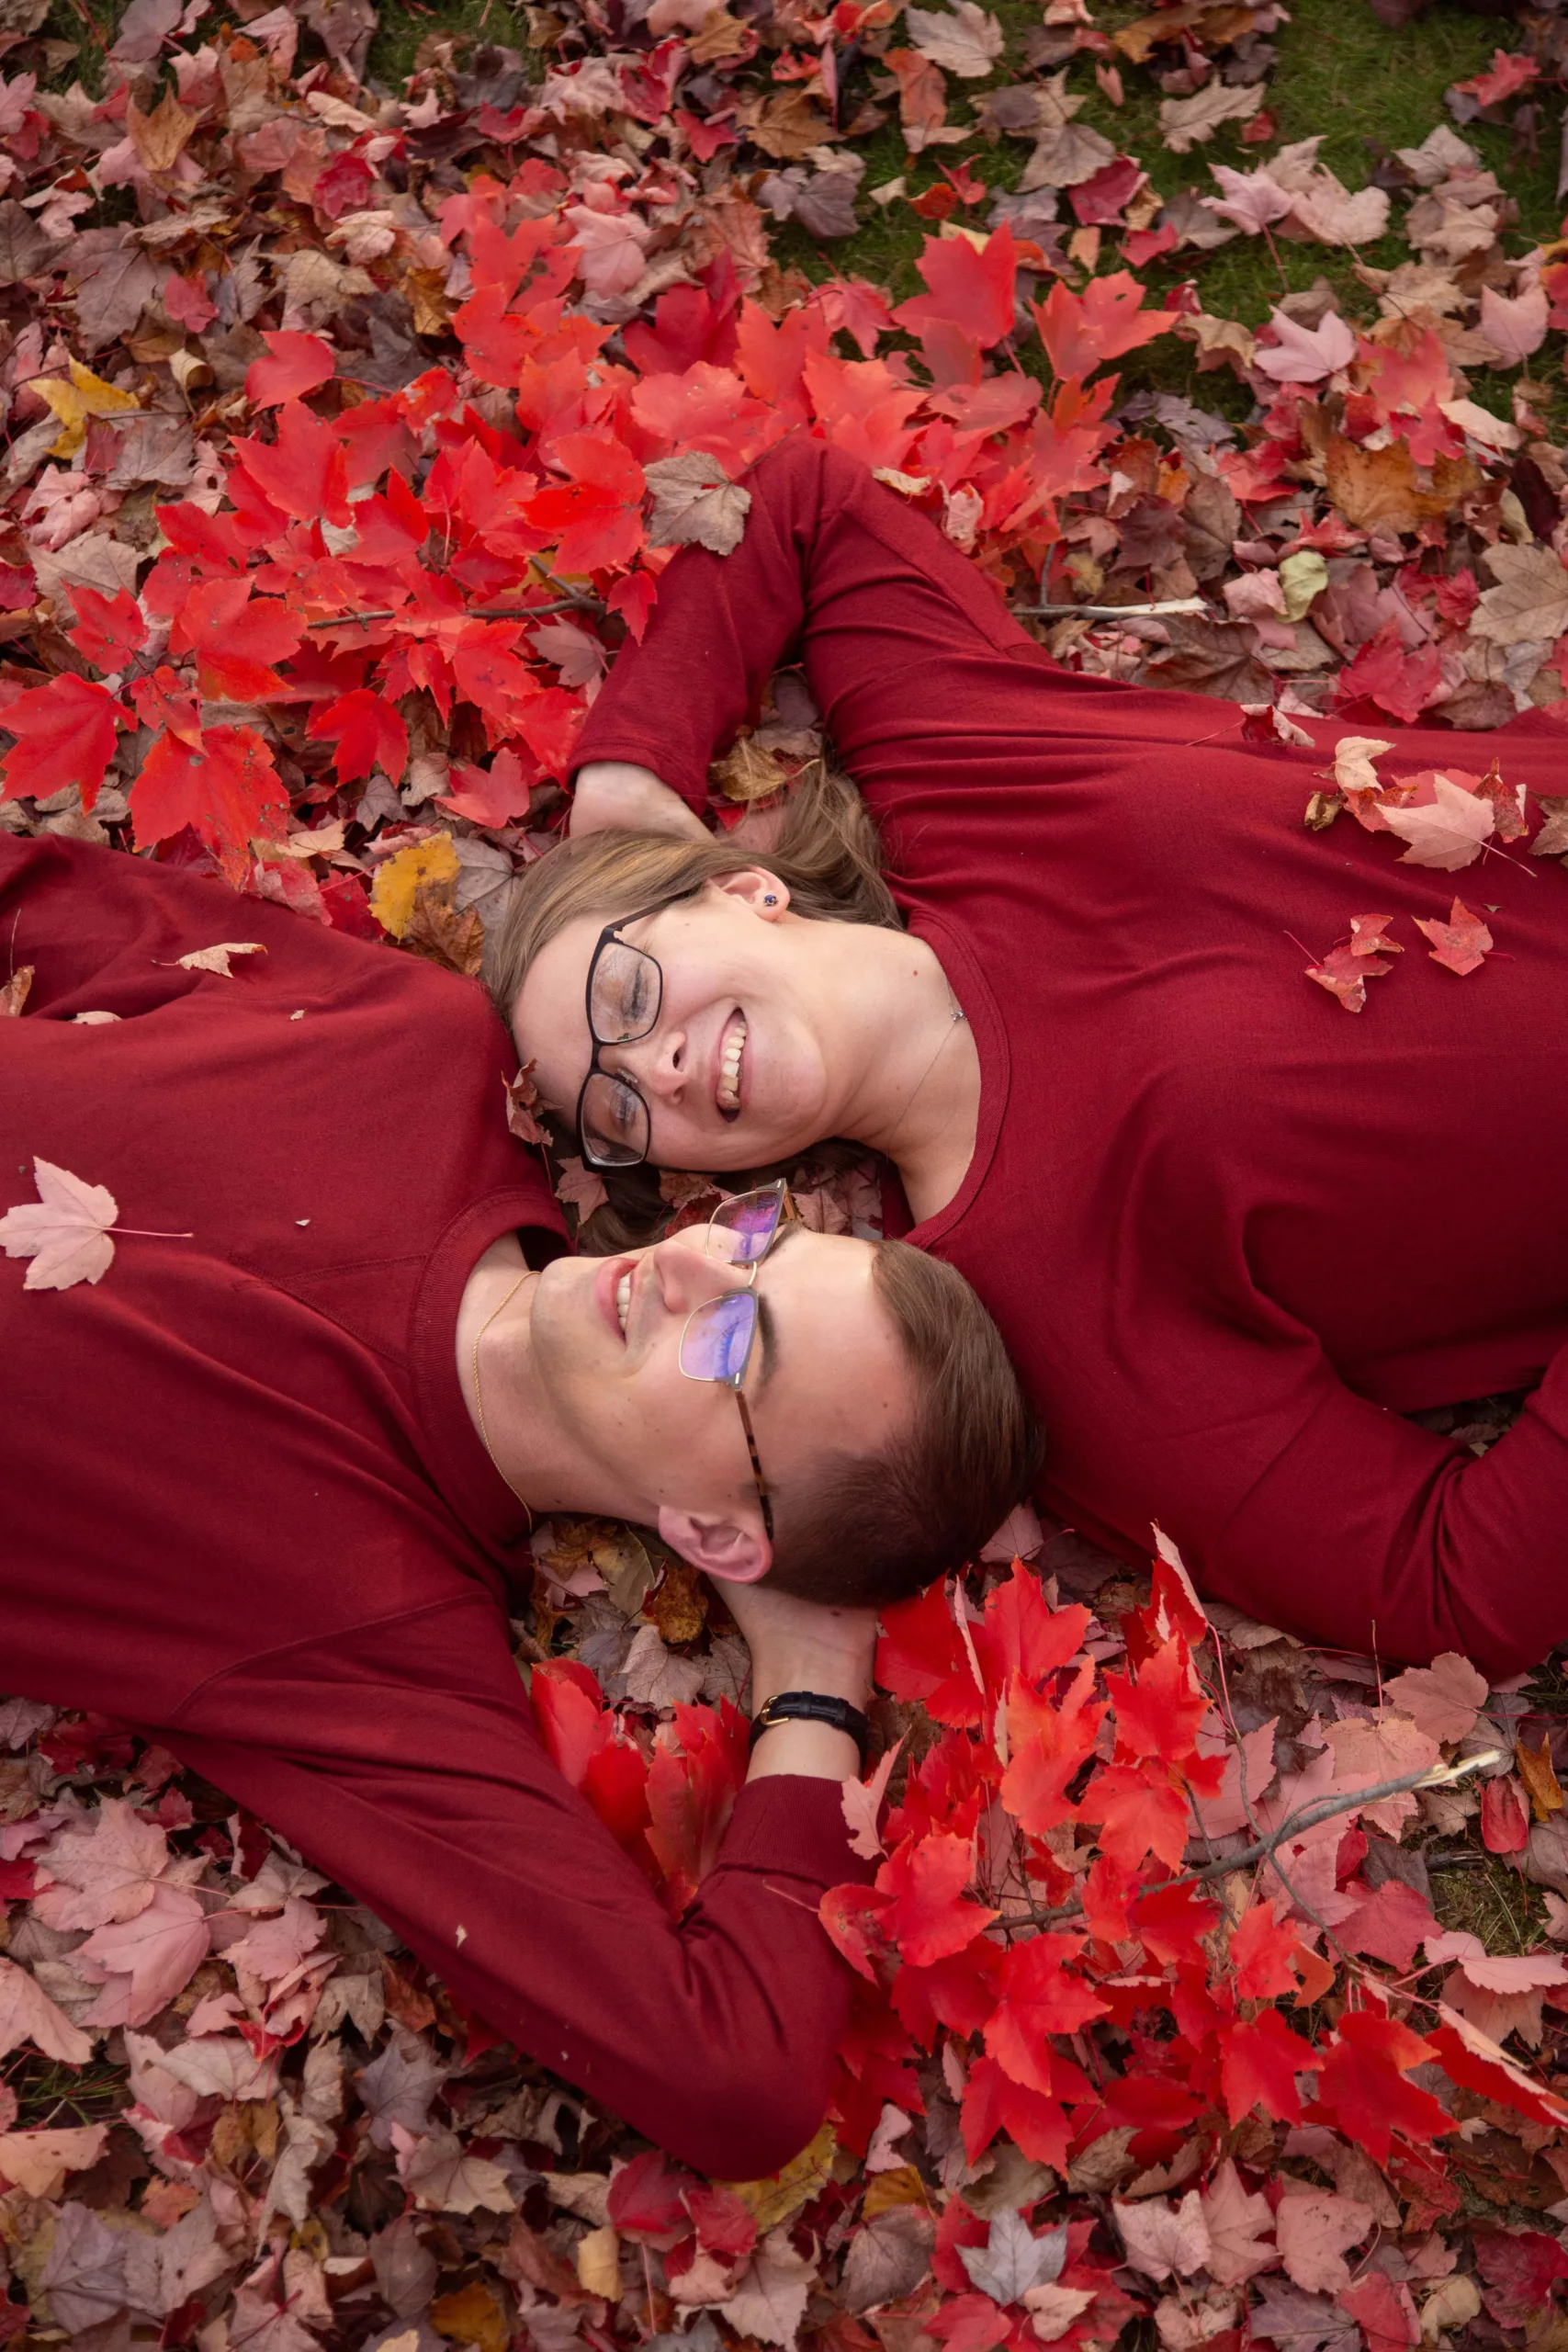 LightMaster-Studios-Website - engagement photos in Morristown NJ - Engaged coupled laying in the red autumn leaves - fall engagement session -9051